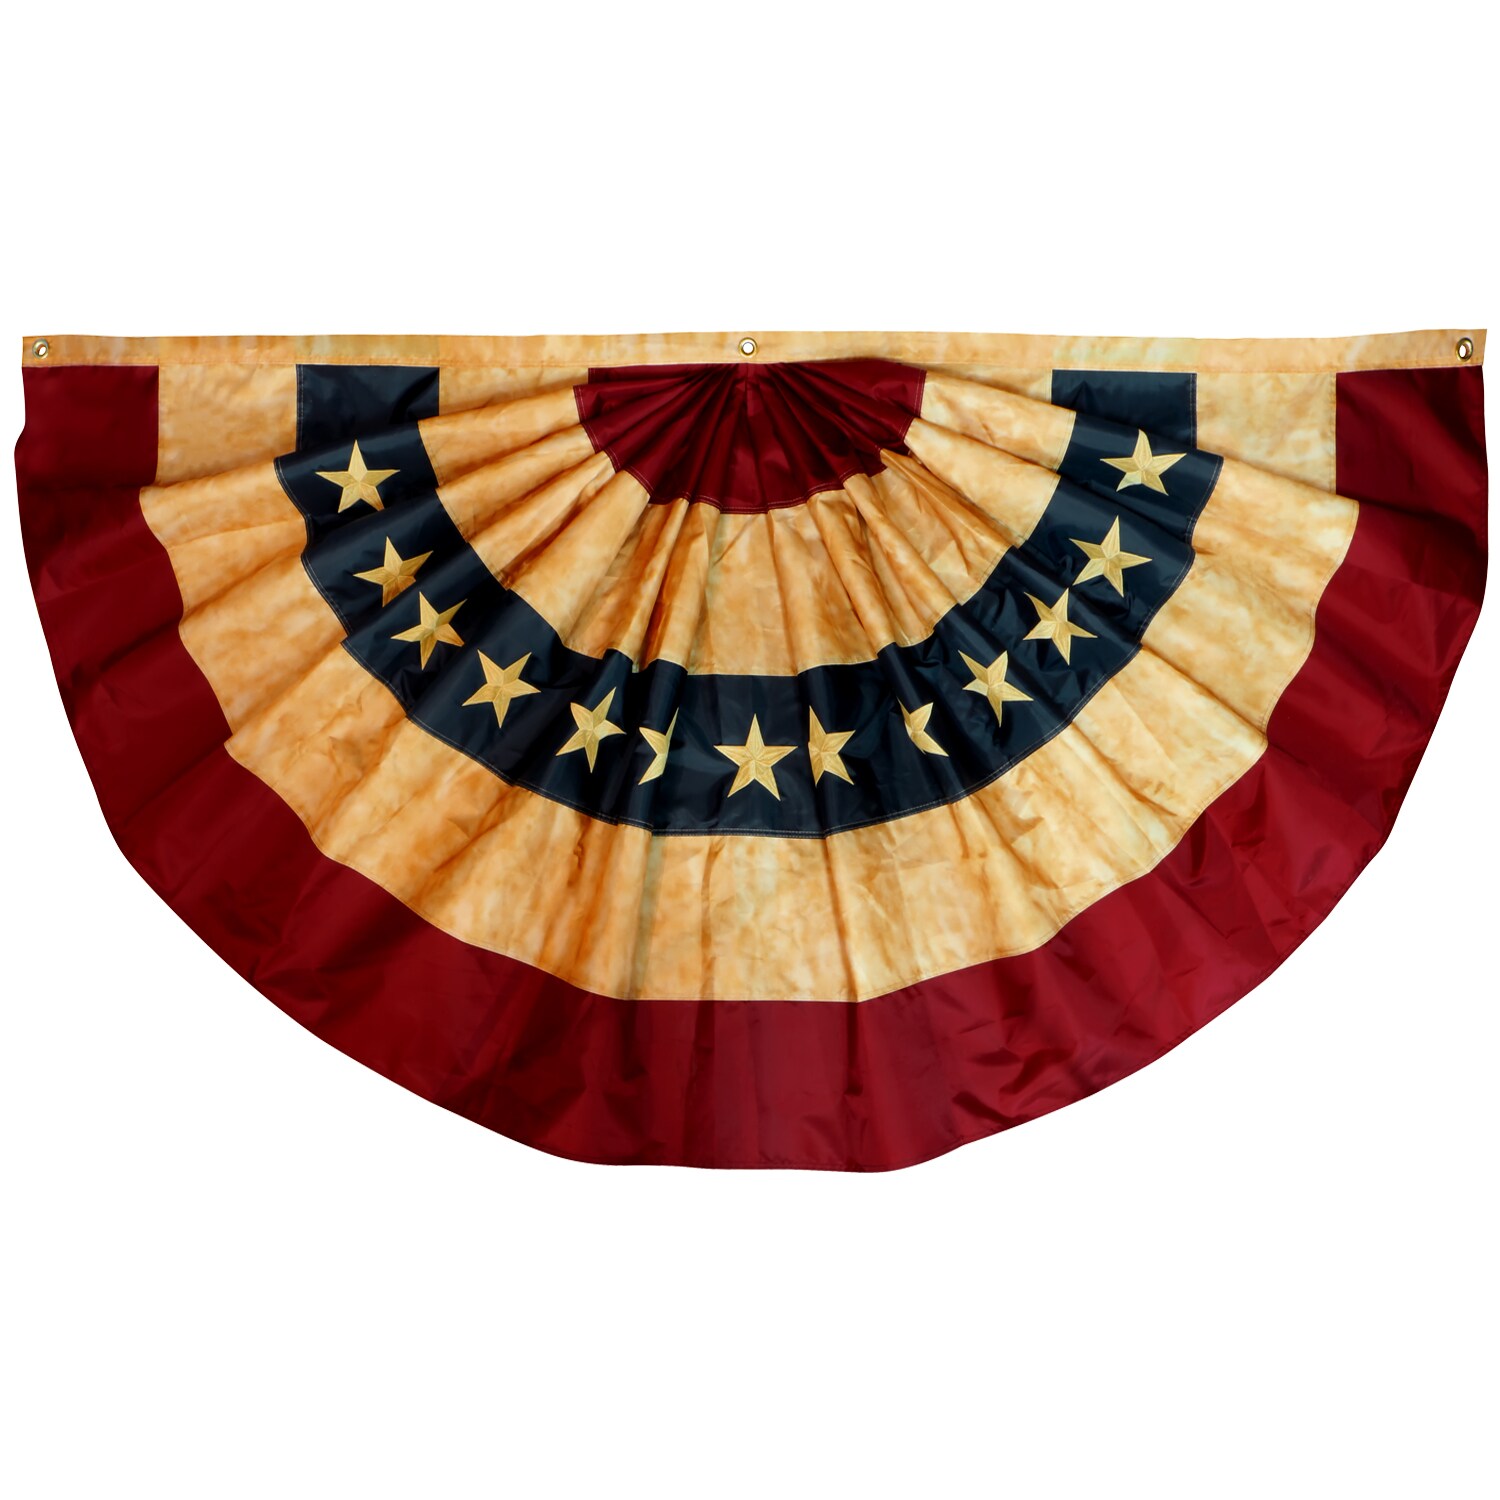 PATRIOTIC USA BUNTING AMERICAN FLAG POLYESTER DOUBLE SIDED 5 X 3 FT 4th of July 